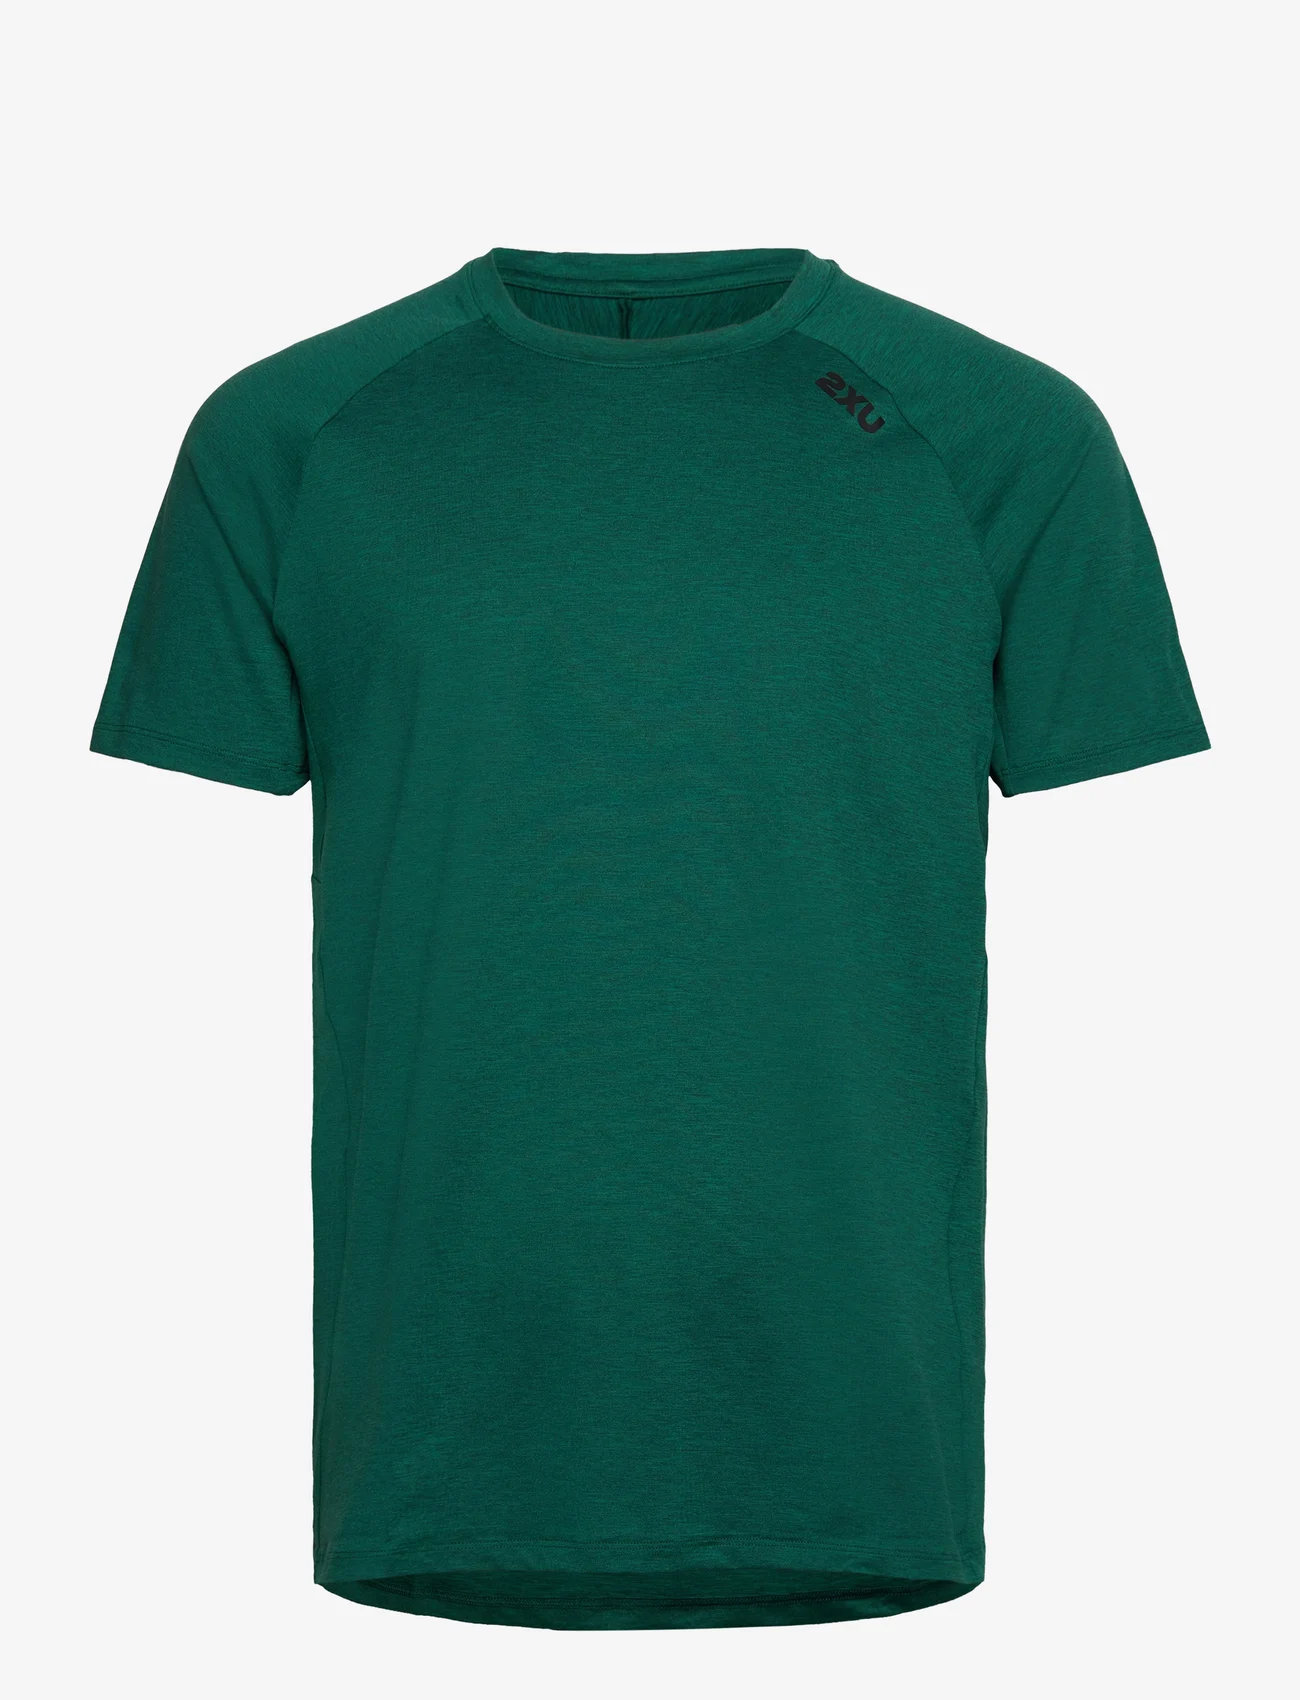 2XU - MOTION TEE - short-sleeved t-shirts - forest green/black - 0